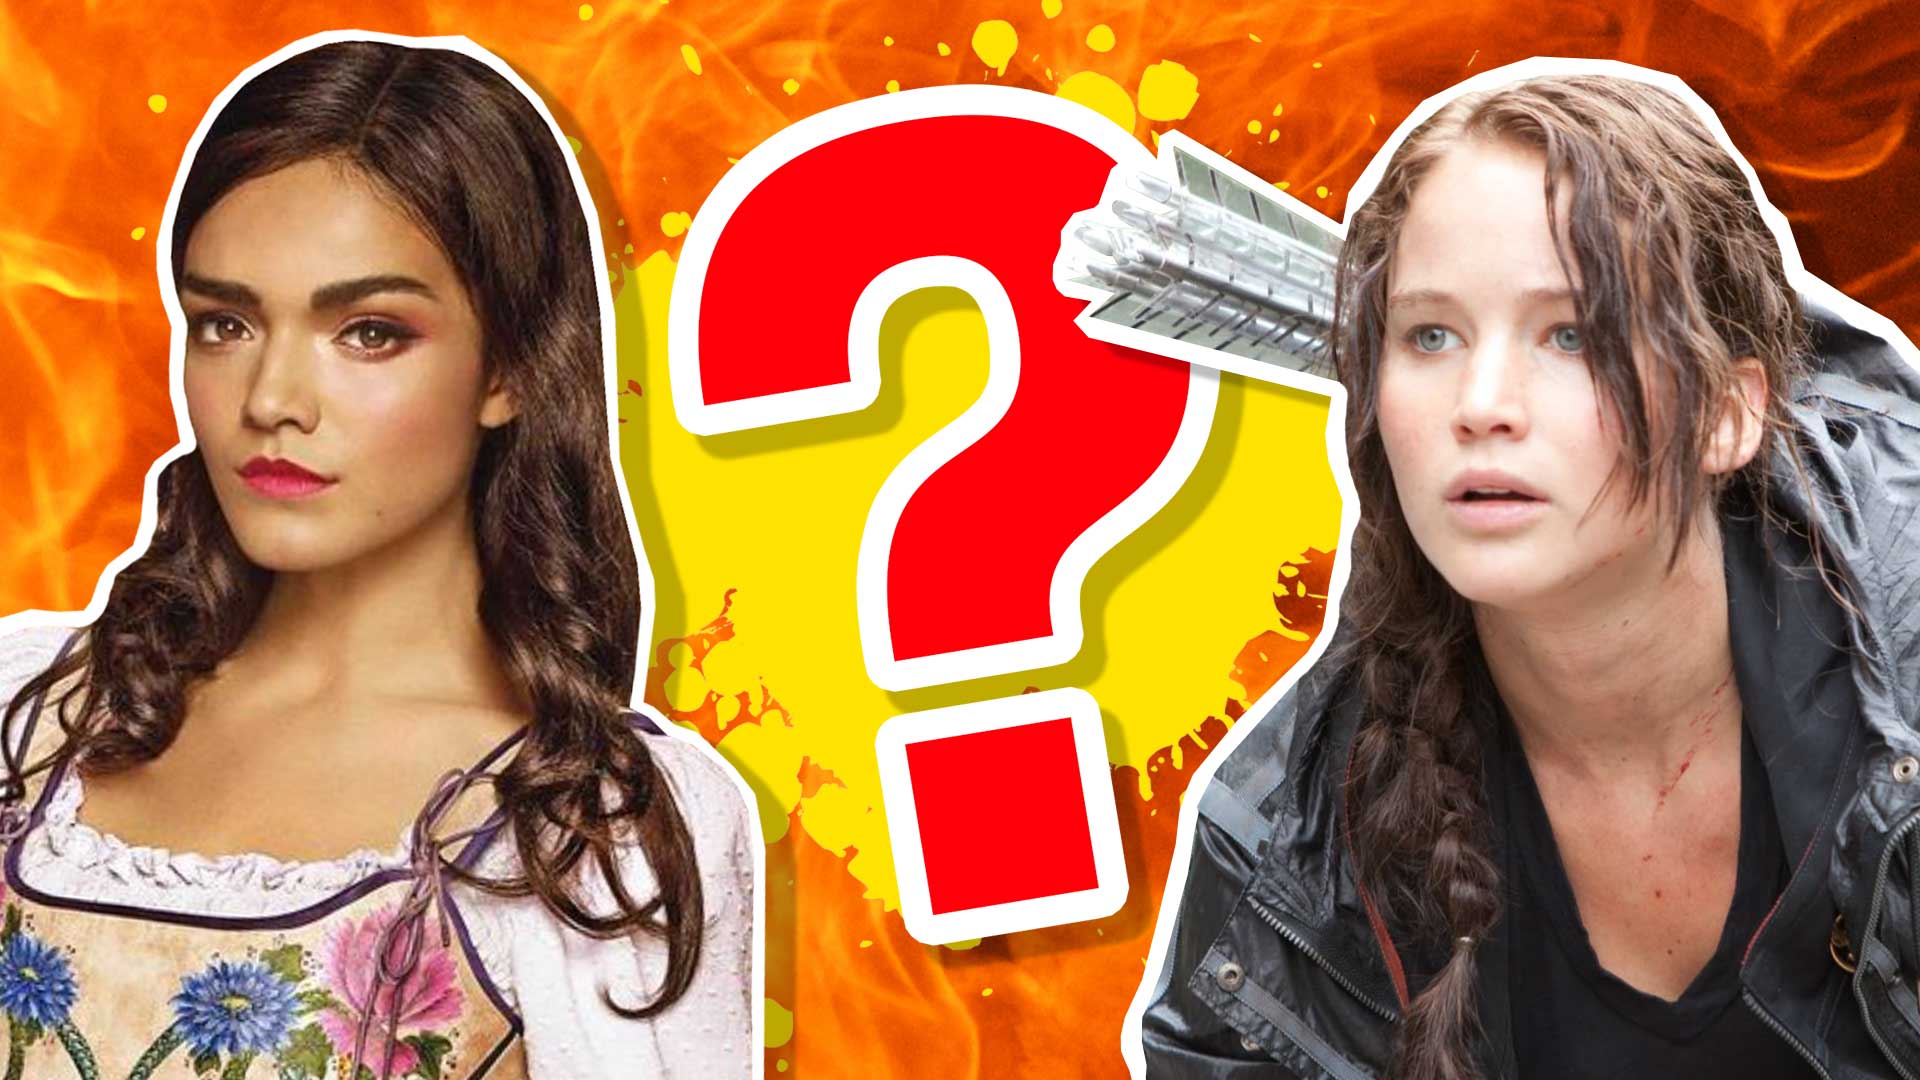 Hunger Games character personality quiz